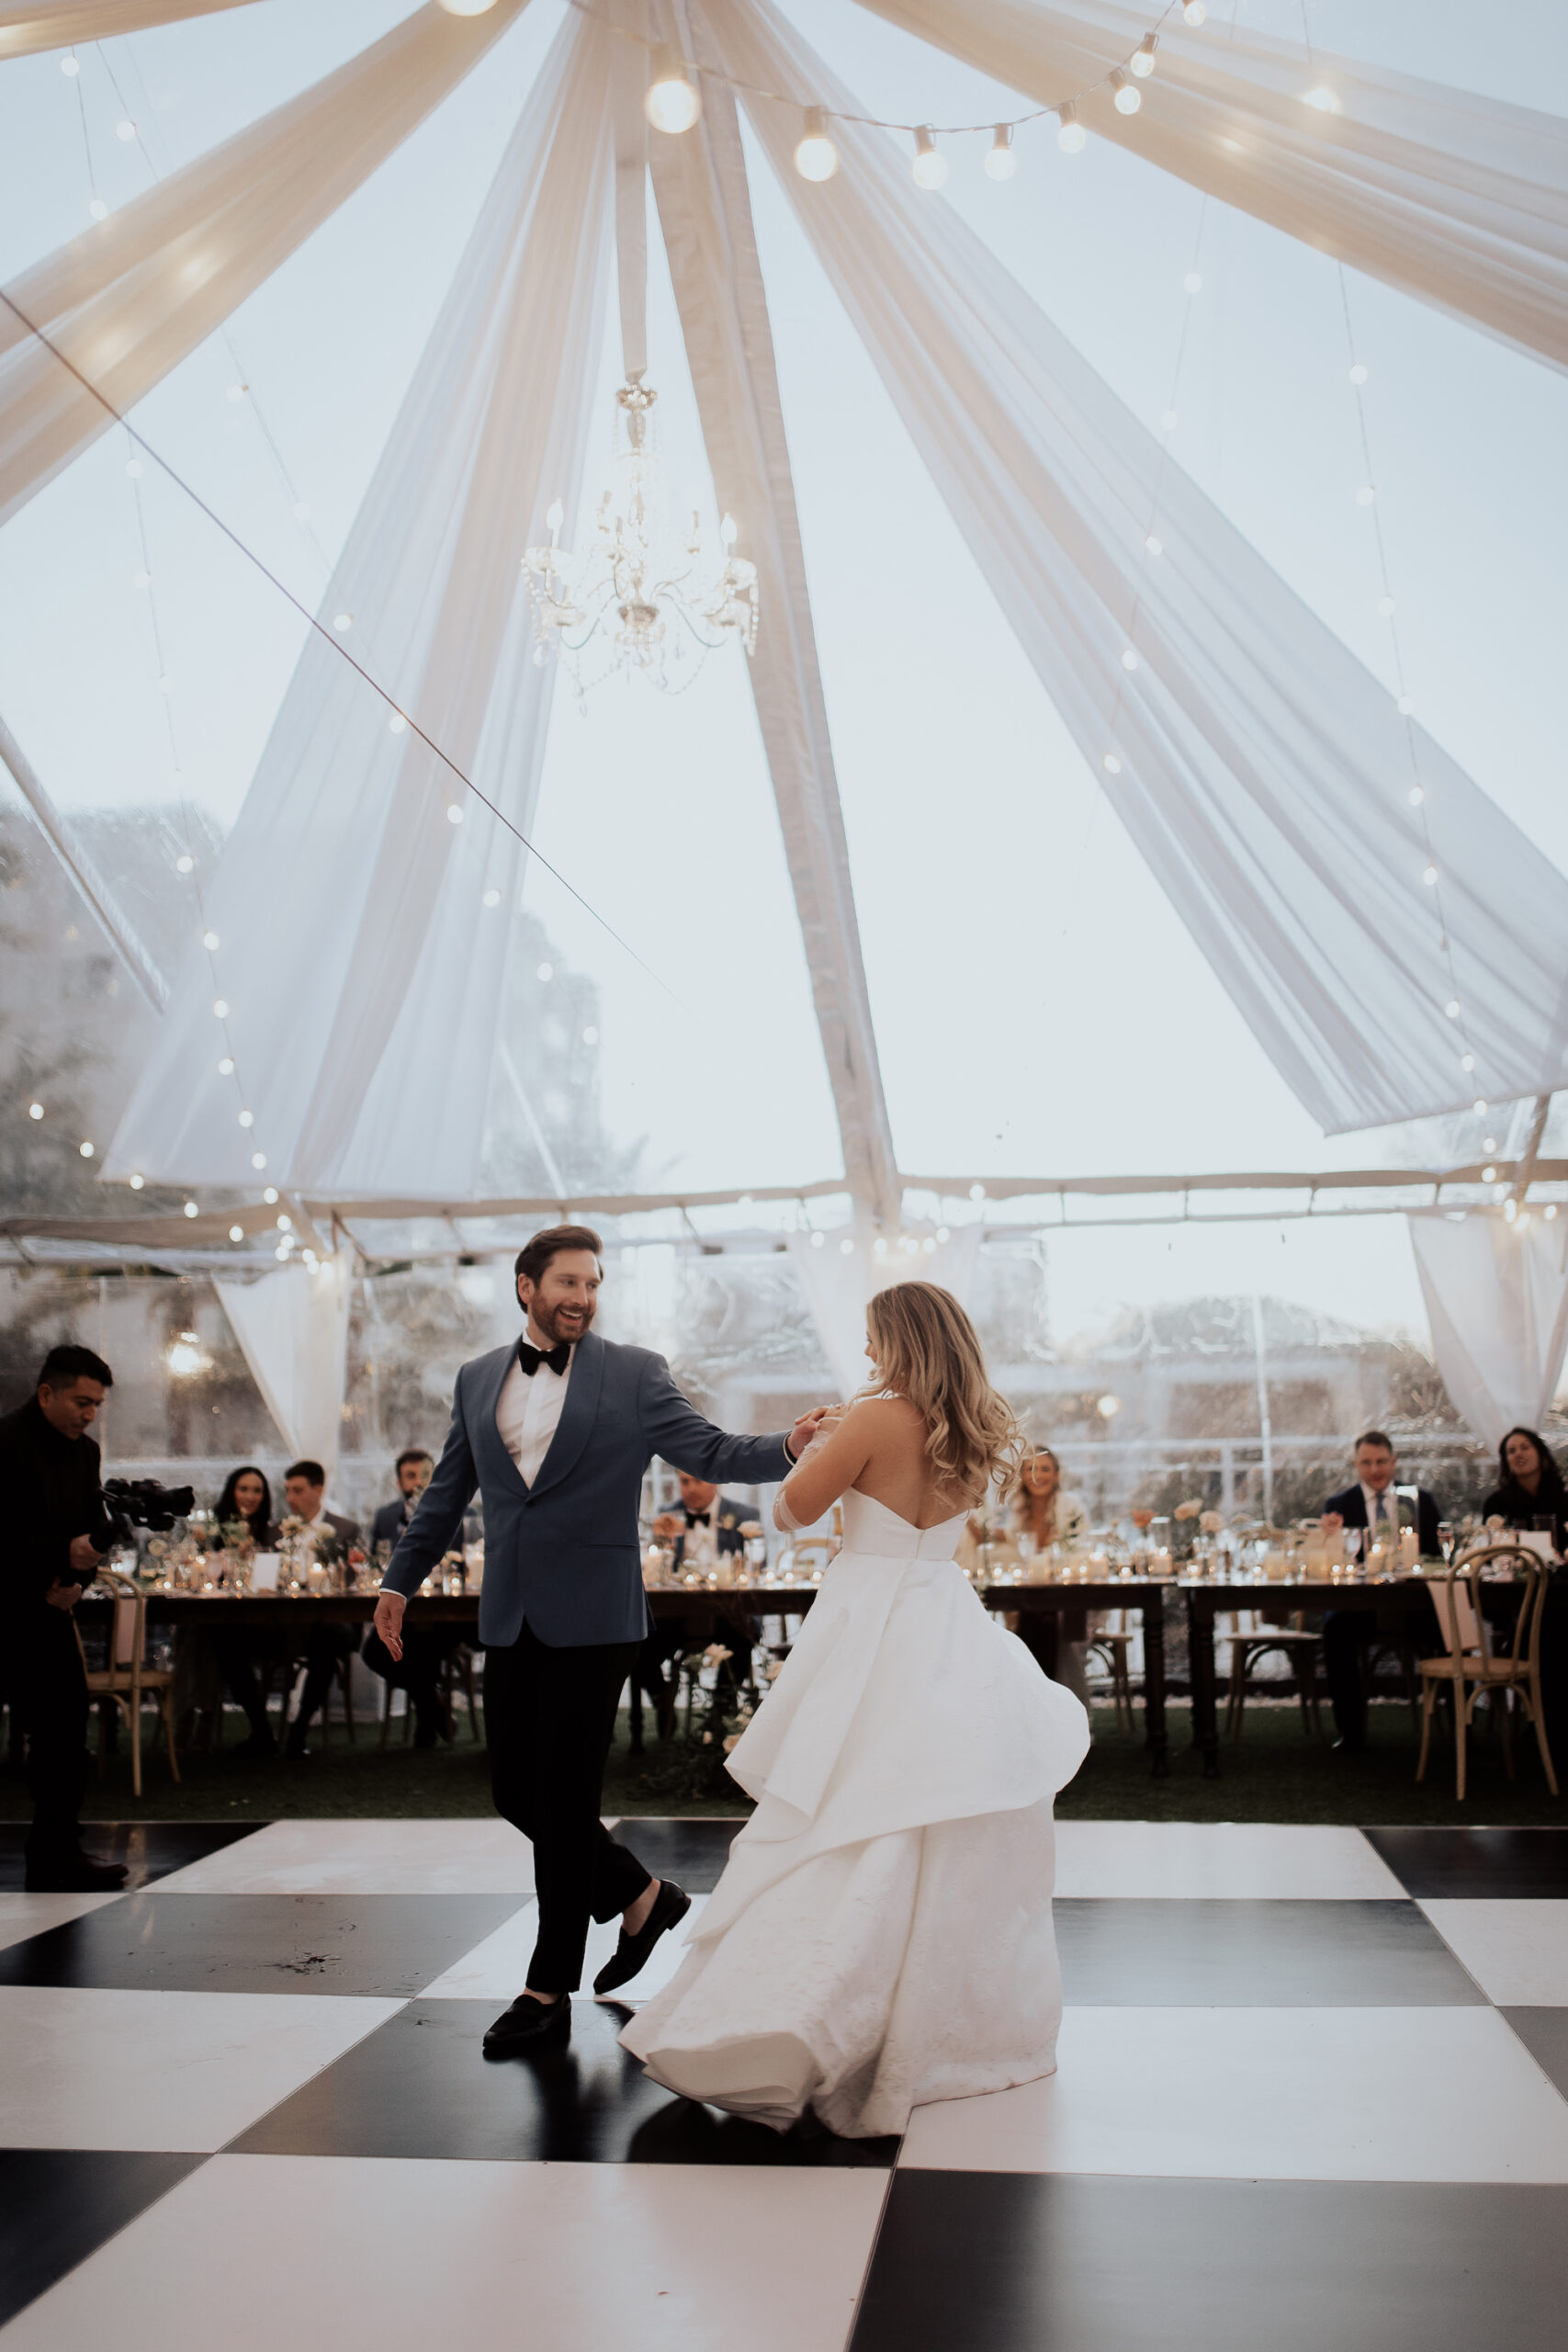 Bride and Groom First Dance | Black and White Checkered Dance Floor | Clearwater Wedding DJ Grant Hemond and Associates | Clearwater Planner Elegant Affairs By Design